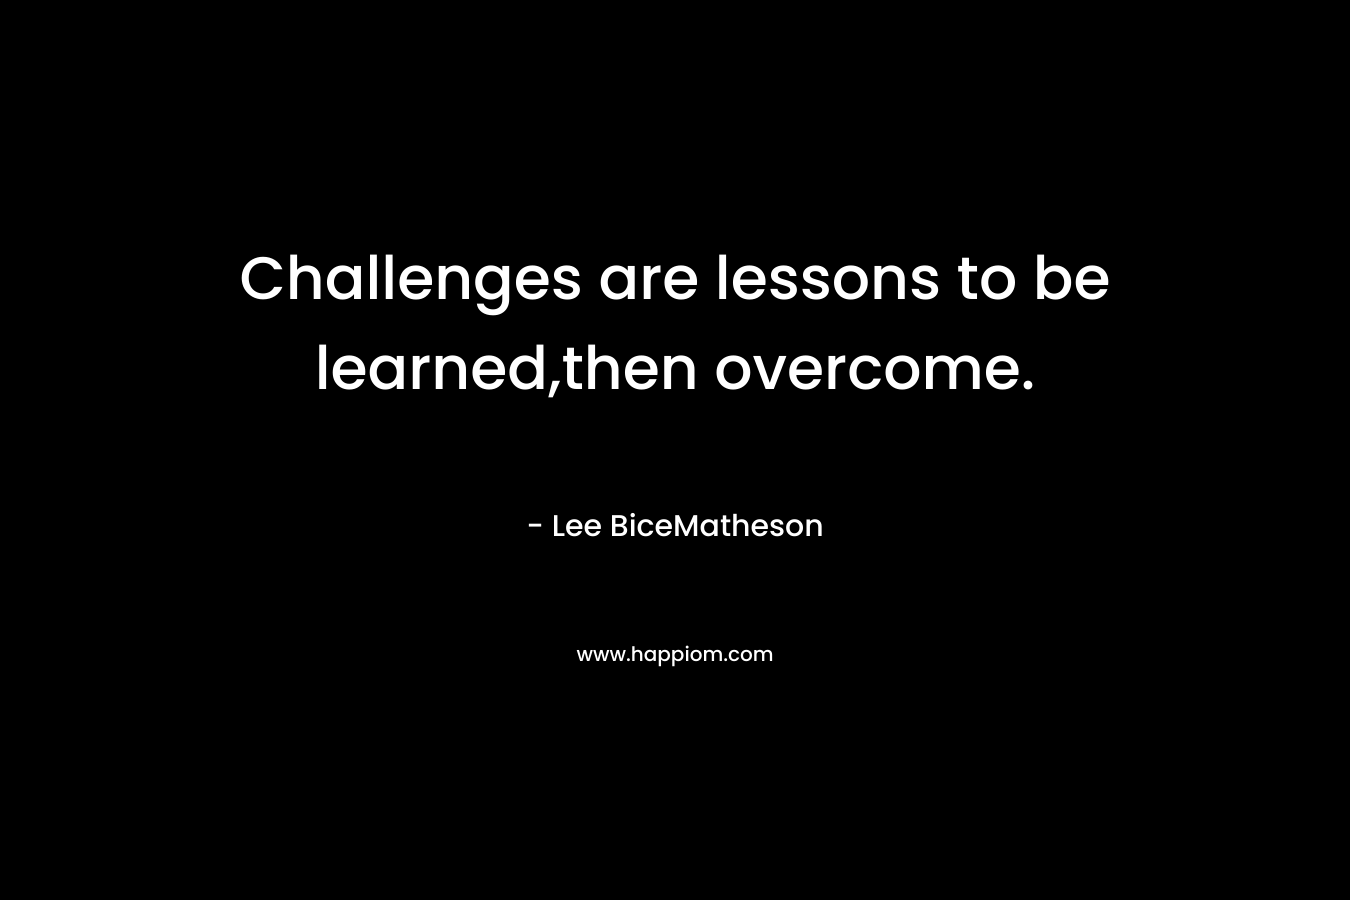 Challenges are lessons to be learned,then overcome.